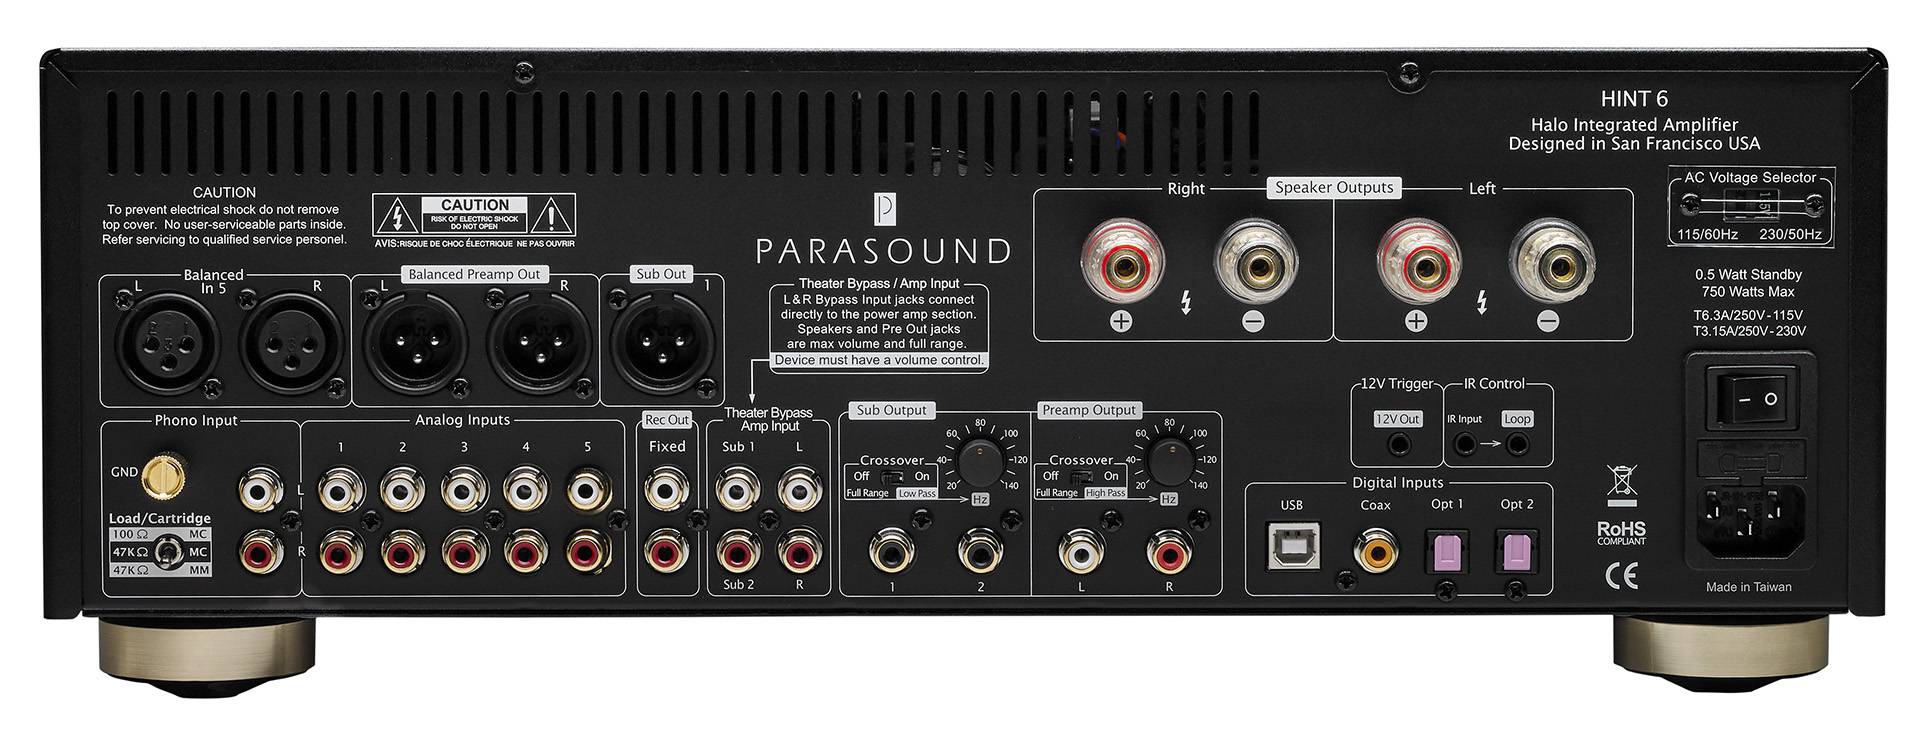 Parasound Halo Integrated